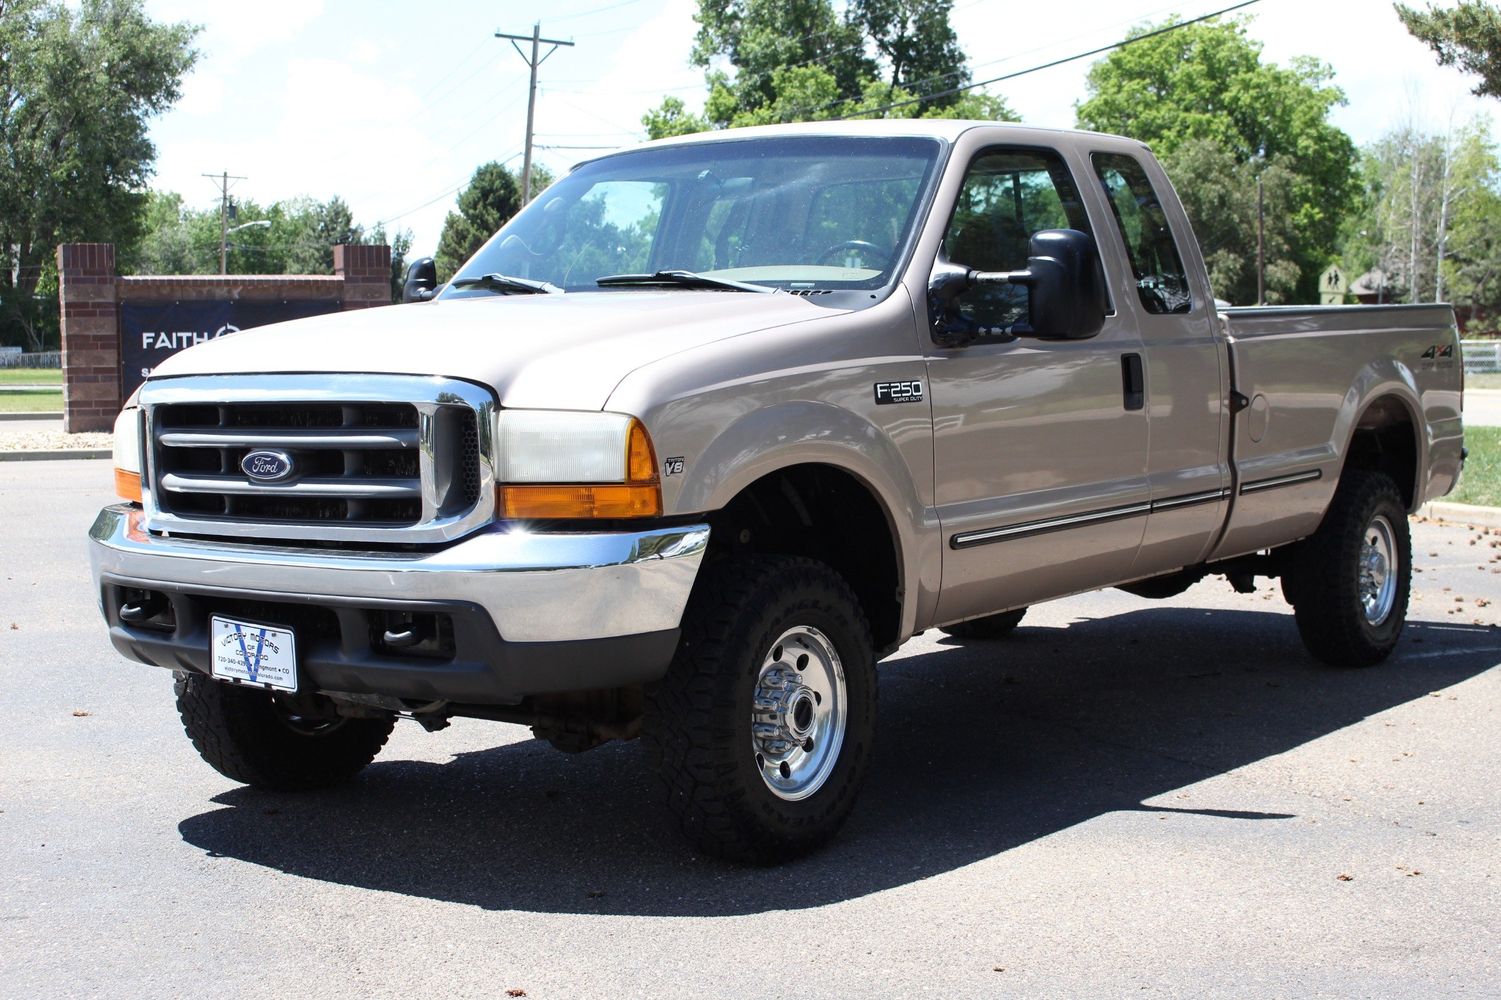 1999 Ford F-250 Super Duty XLT | Victory Motors of Colorado 1999 Ford F250 Light Duty Towing Capacity